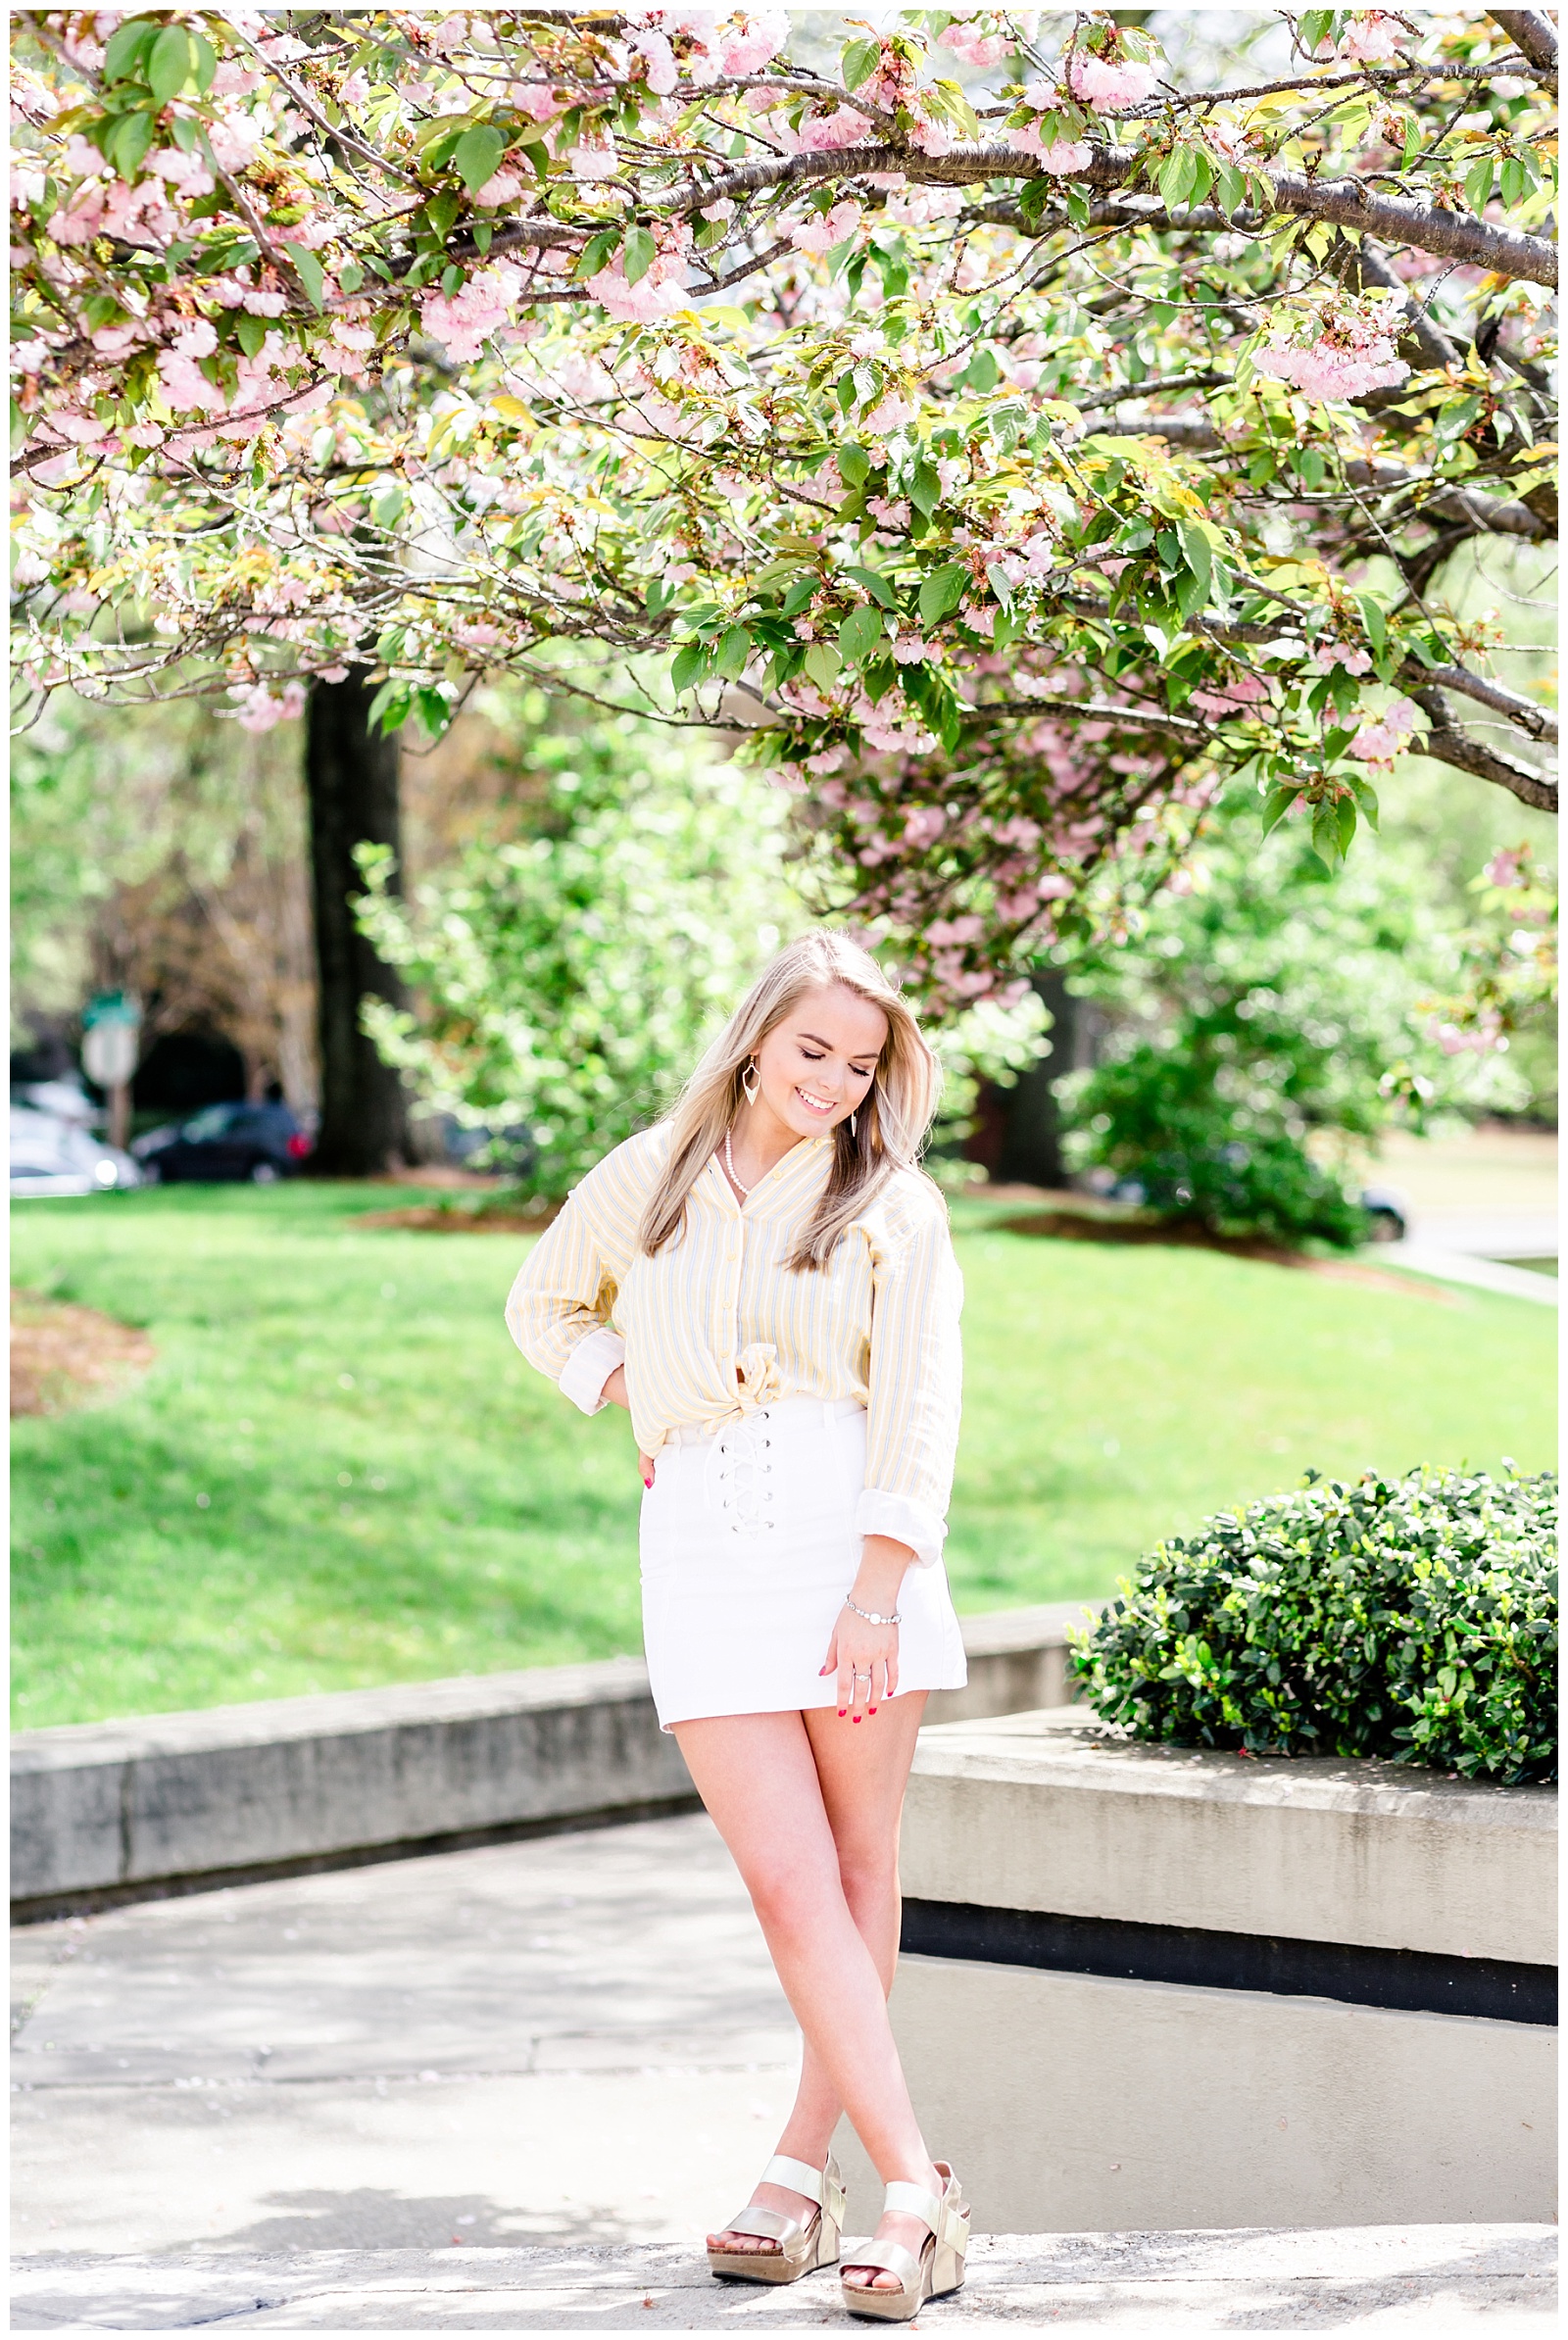 Downtown Spring Senior Girl Session with A Blue Jean Jacket, Yellow and Blue Striped Tied Flannel, and a White Skirt